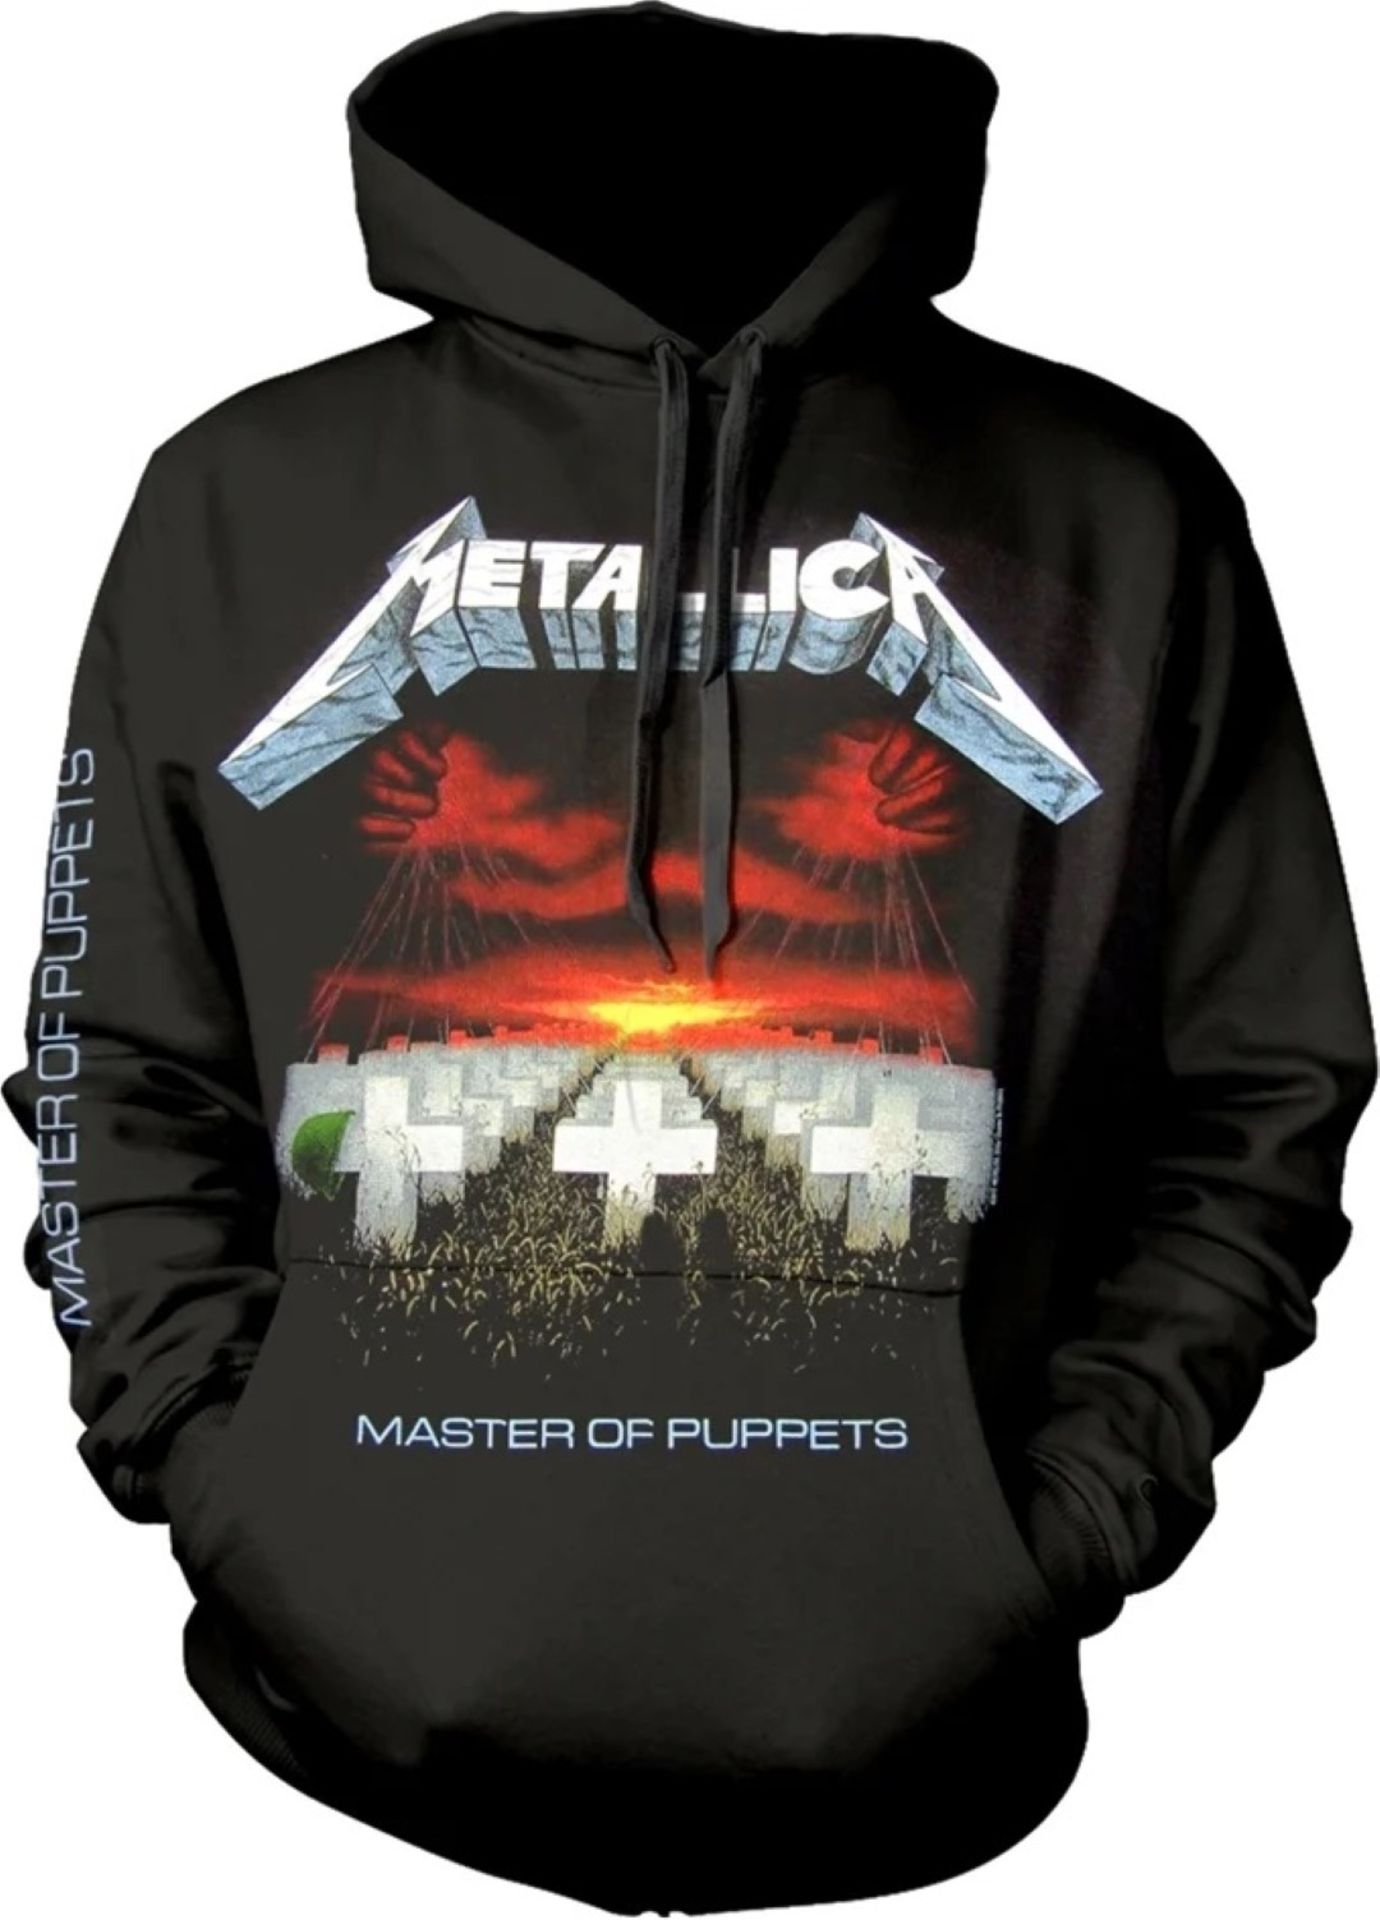 1 x Metallica Master of Puppets Men's Hoodie Jumper - Size: Large - RRP £50 - Officially Licensed